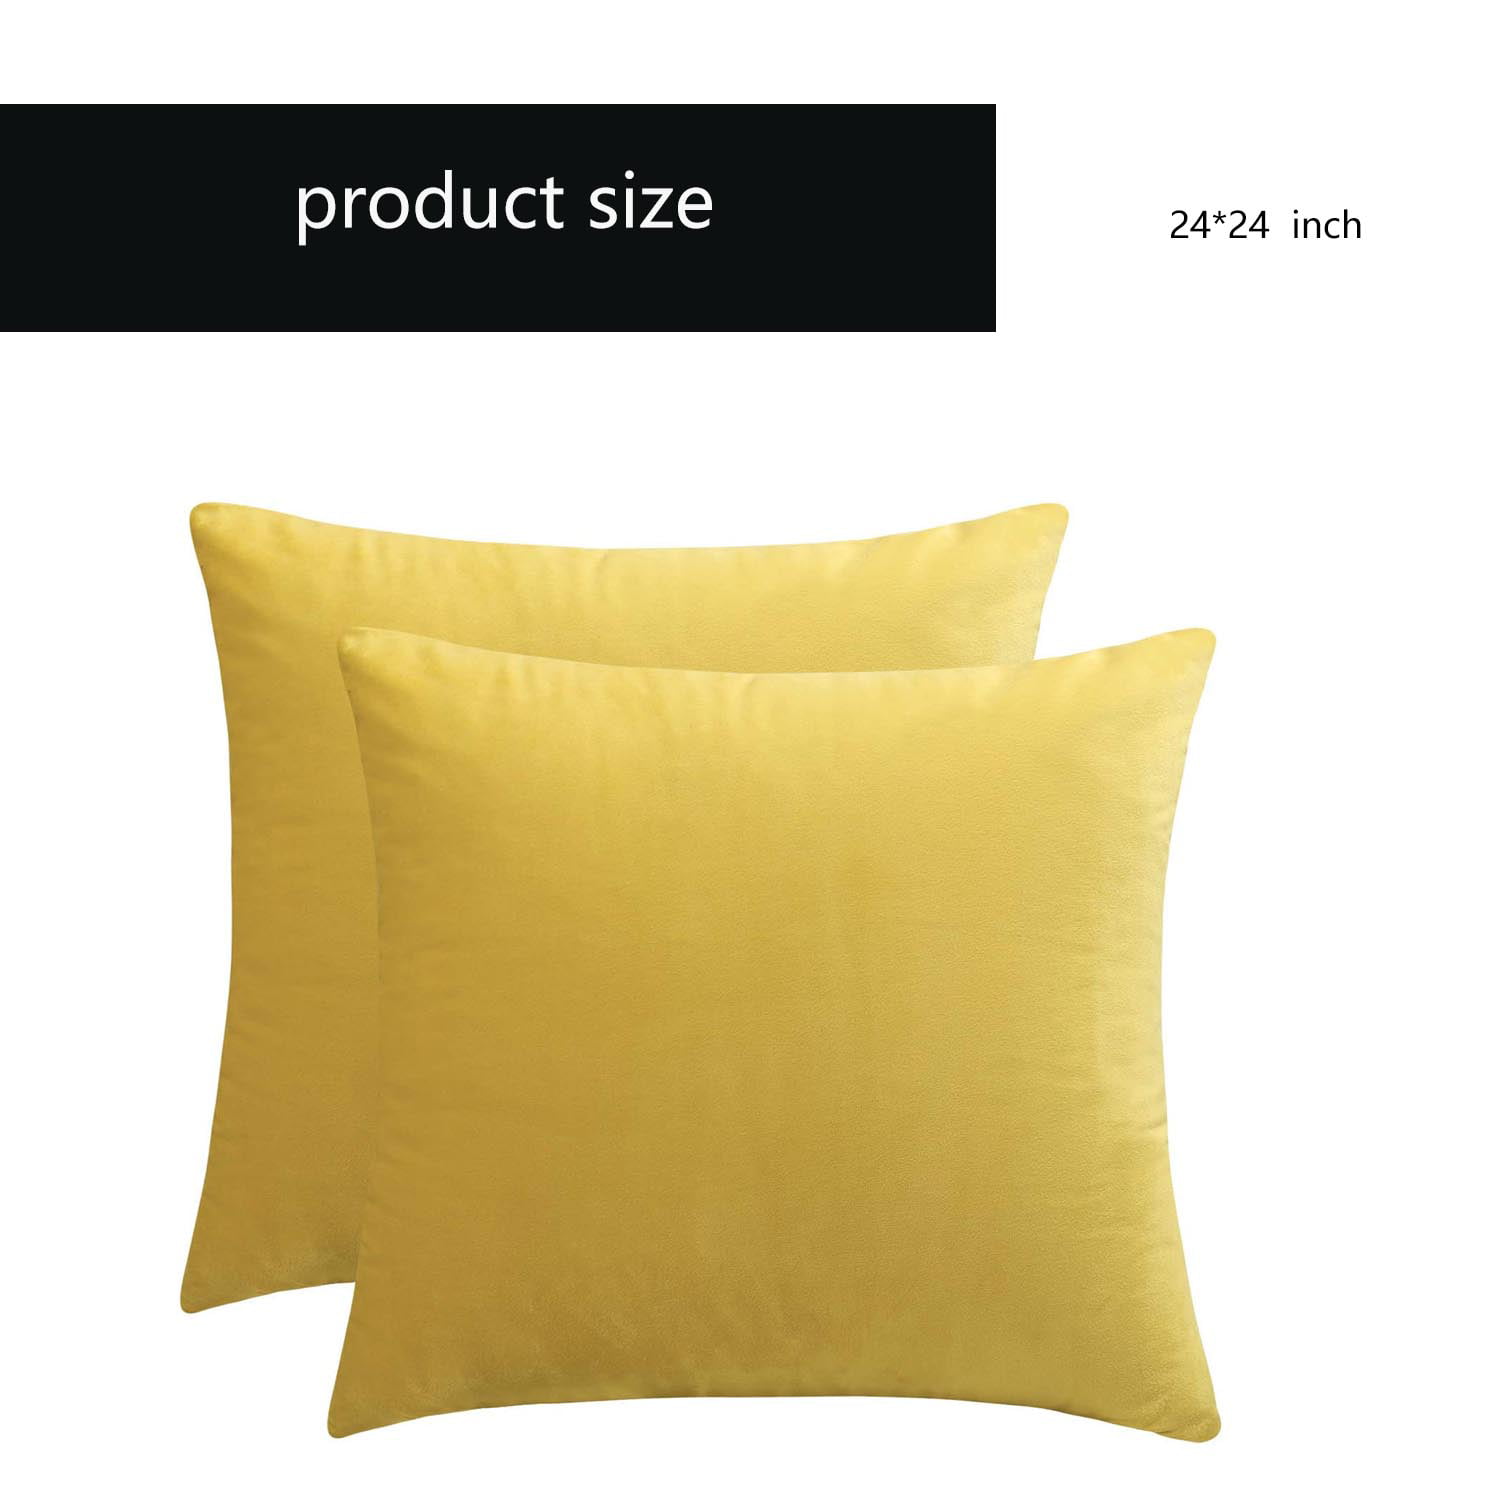  Sunday Praise Set of 2 Soft Thick Velvet Decorative Large Throw  Pillow Covers 24 x 24 Inches for Couch Sofa Bed Chair,Lemon Yellow : Home &  Kitchen